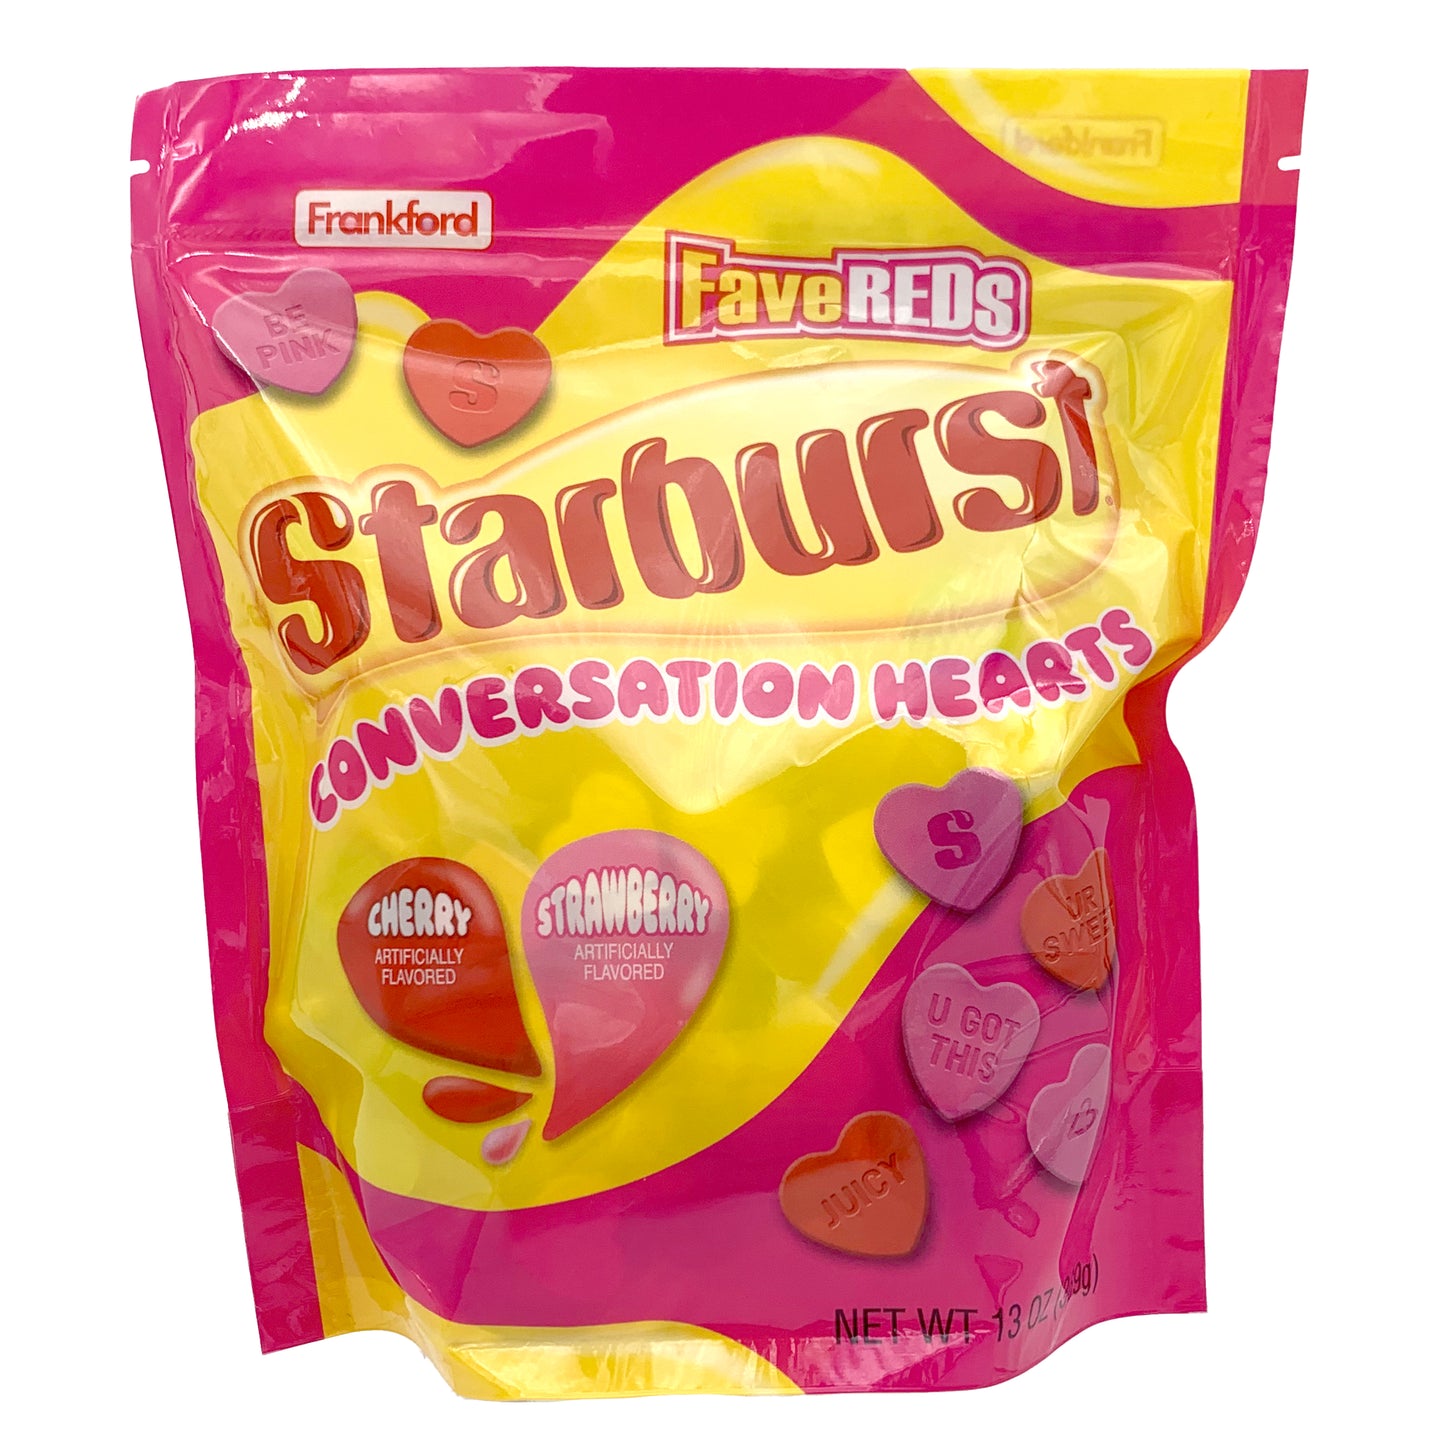 yellow and pink bag of starburst heart shaped hard candy